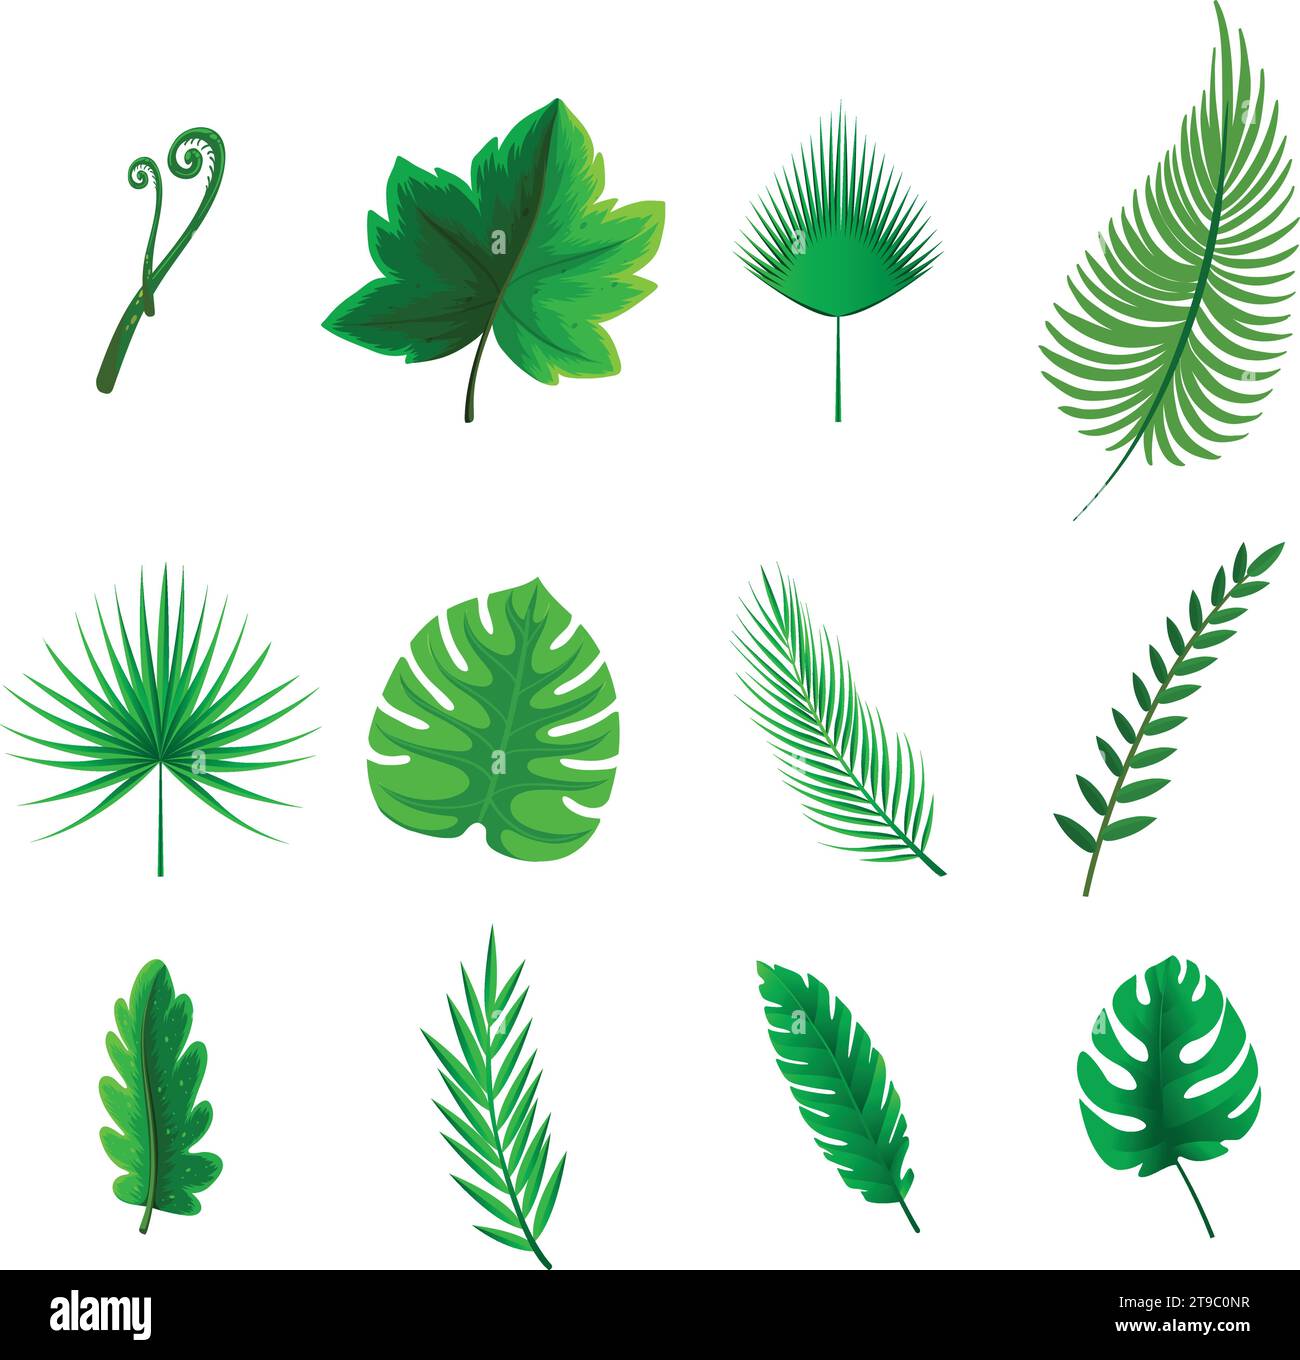 Leaf icons set ecology nature element, green leafs, environment and nature eco sign. Leaves on white background – stock vector Stock Vector